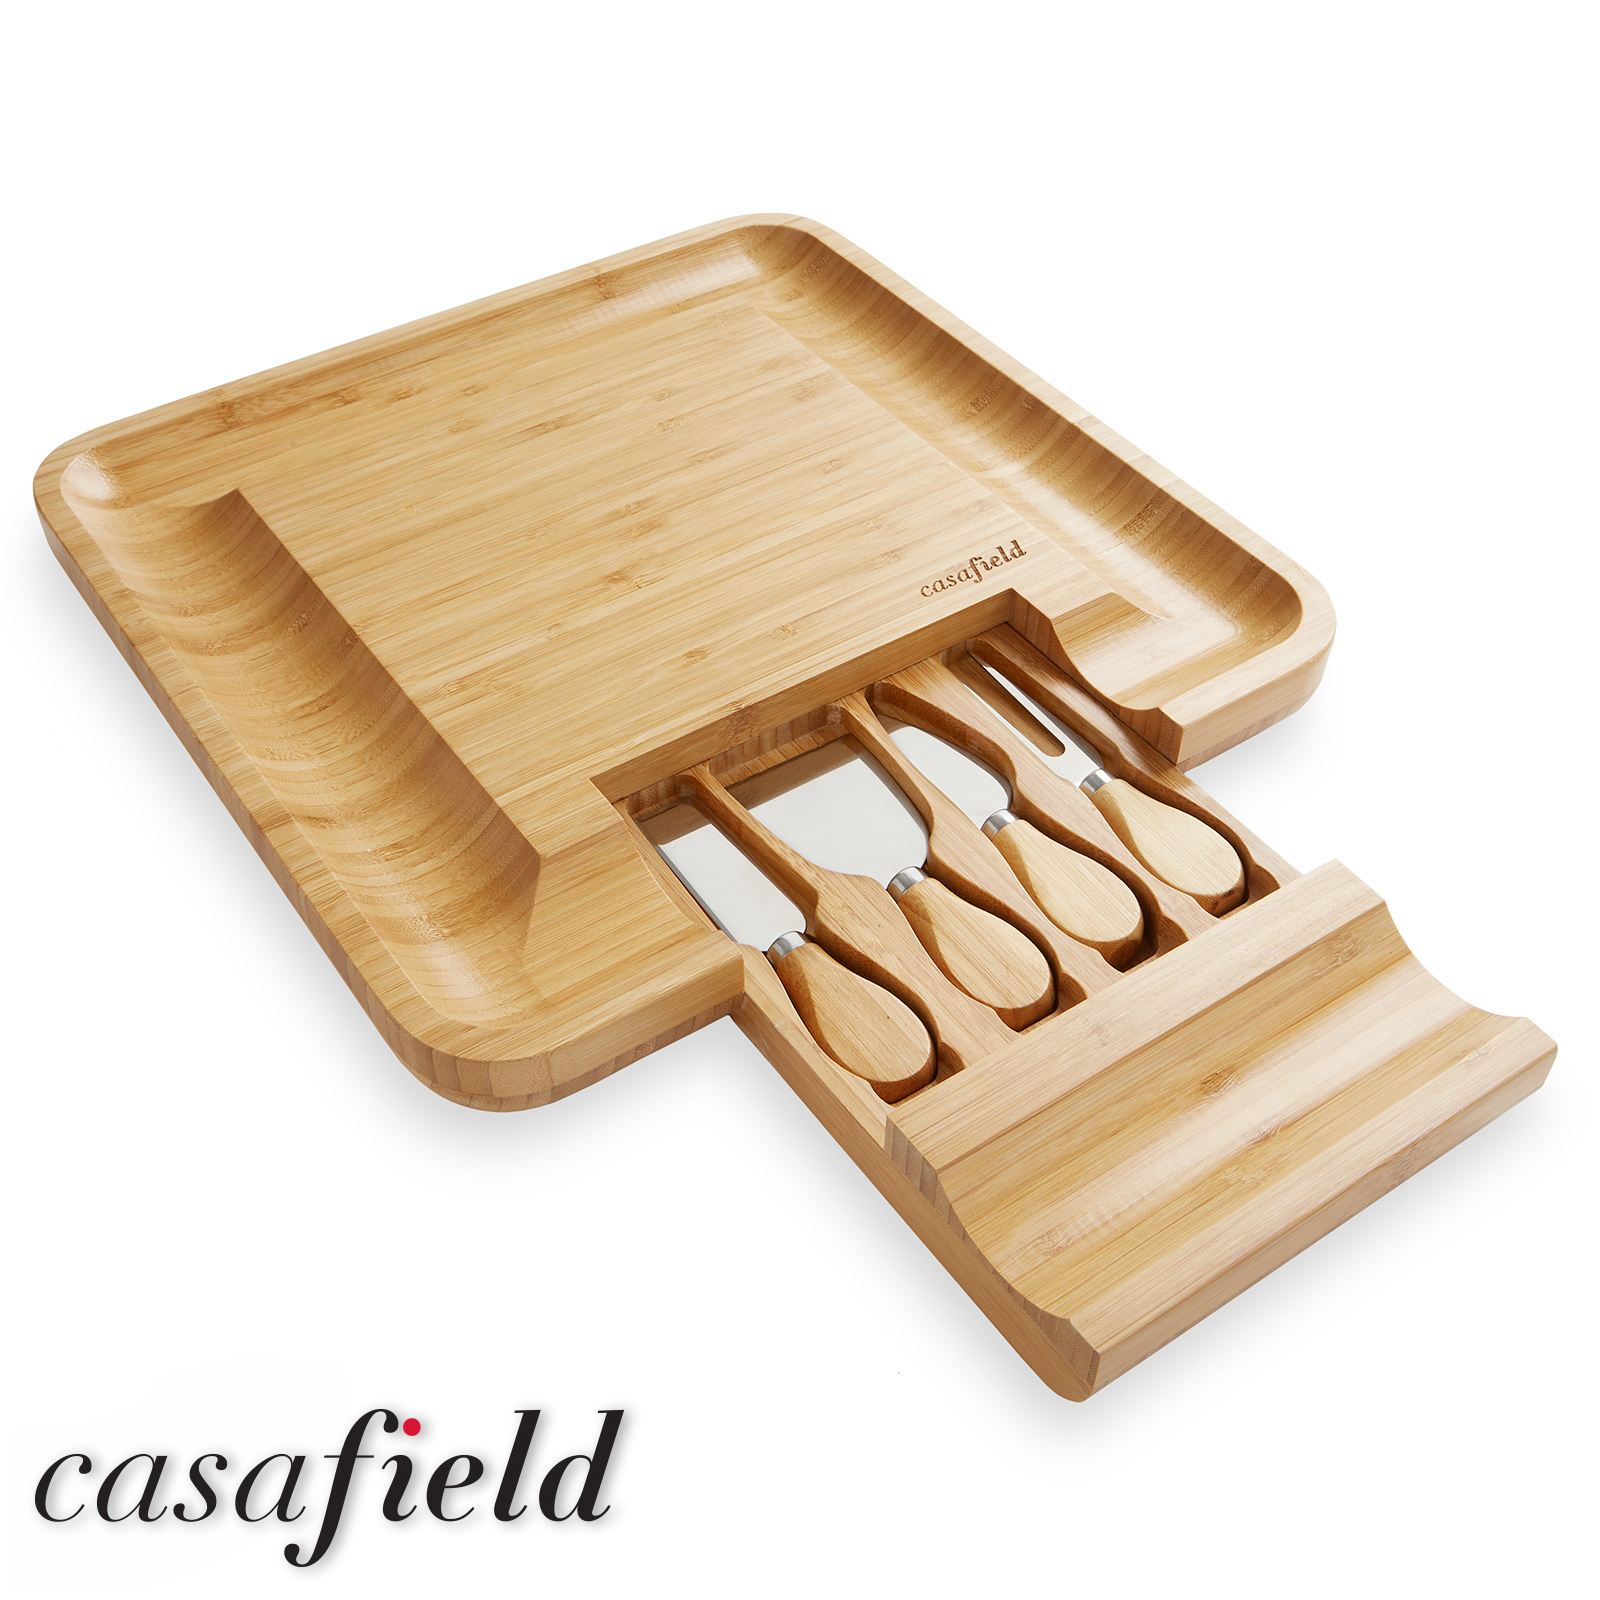 Casafield Organic Bamboo Cheese Cutting Board & Knife Gift Set - Wooden Serving Tray for Charcuterie Meat Platter, Fruit & Crackers - Slide Out Drawer with 4 Stainless Steel Knives - image 2 of 7